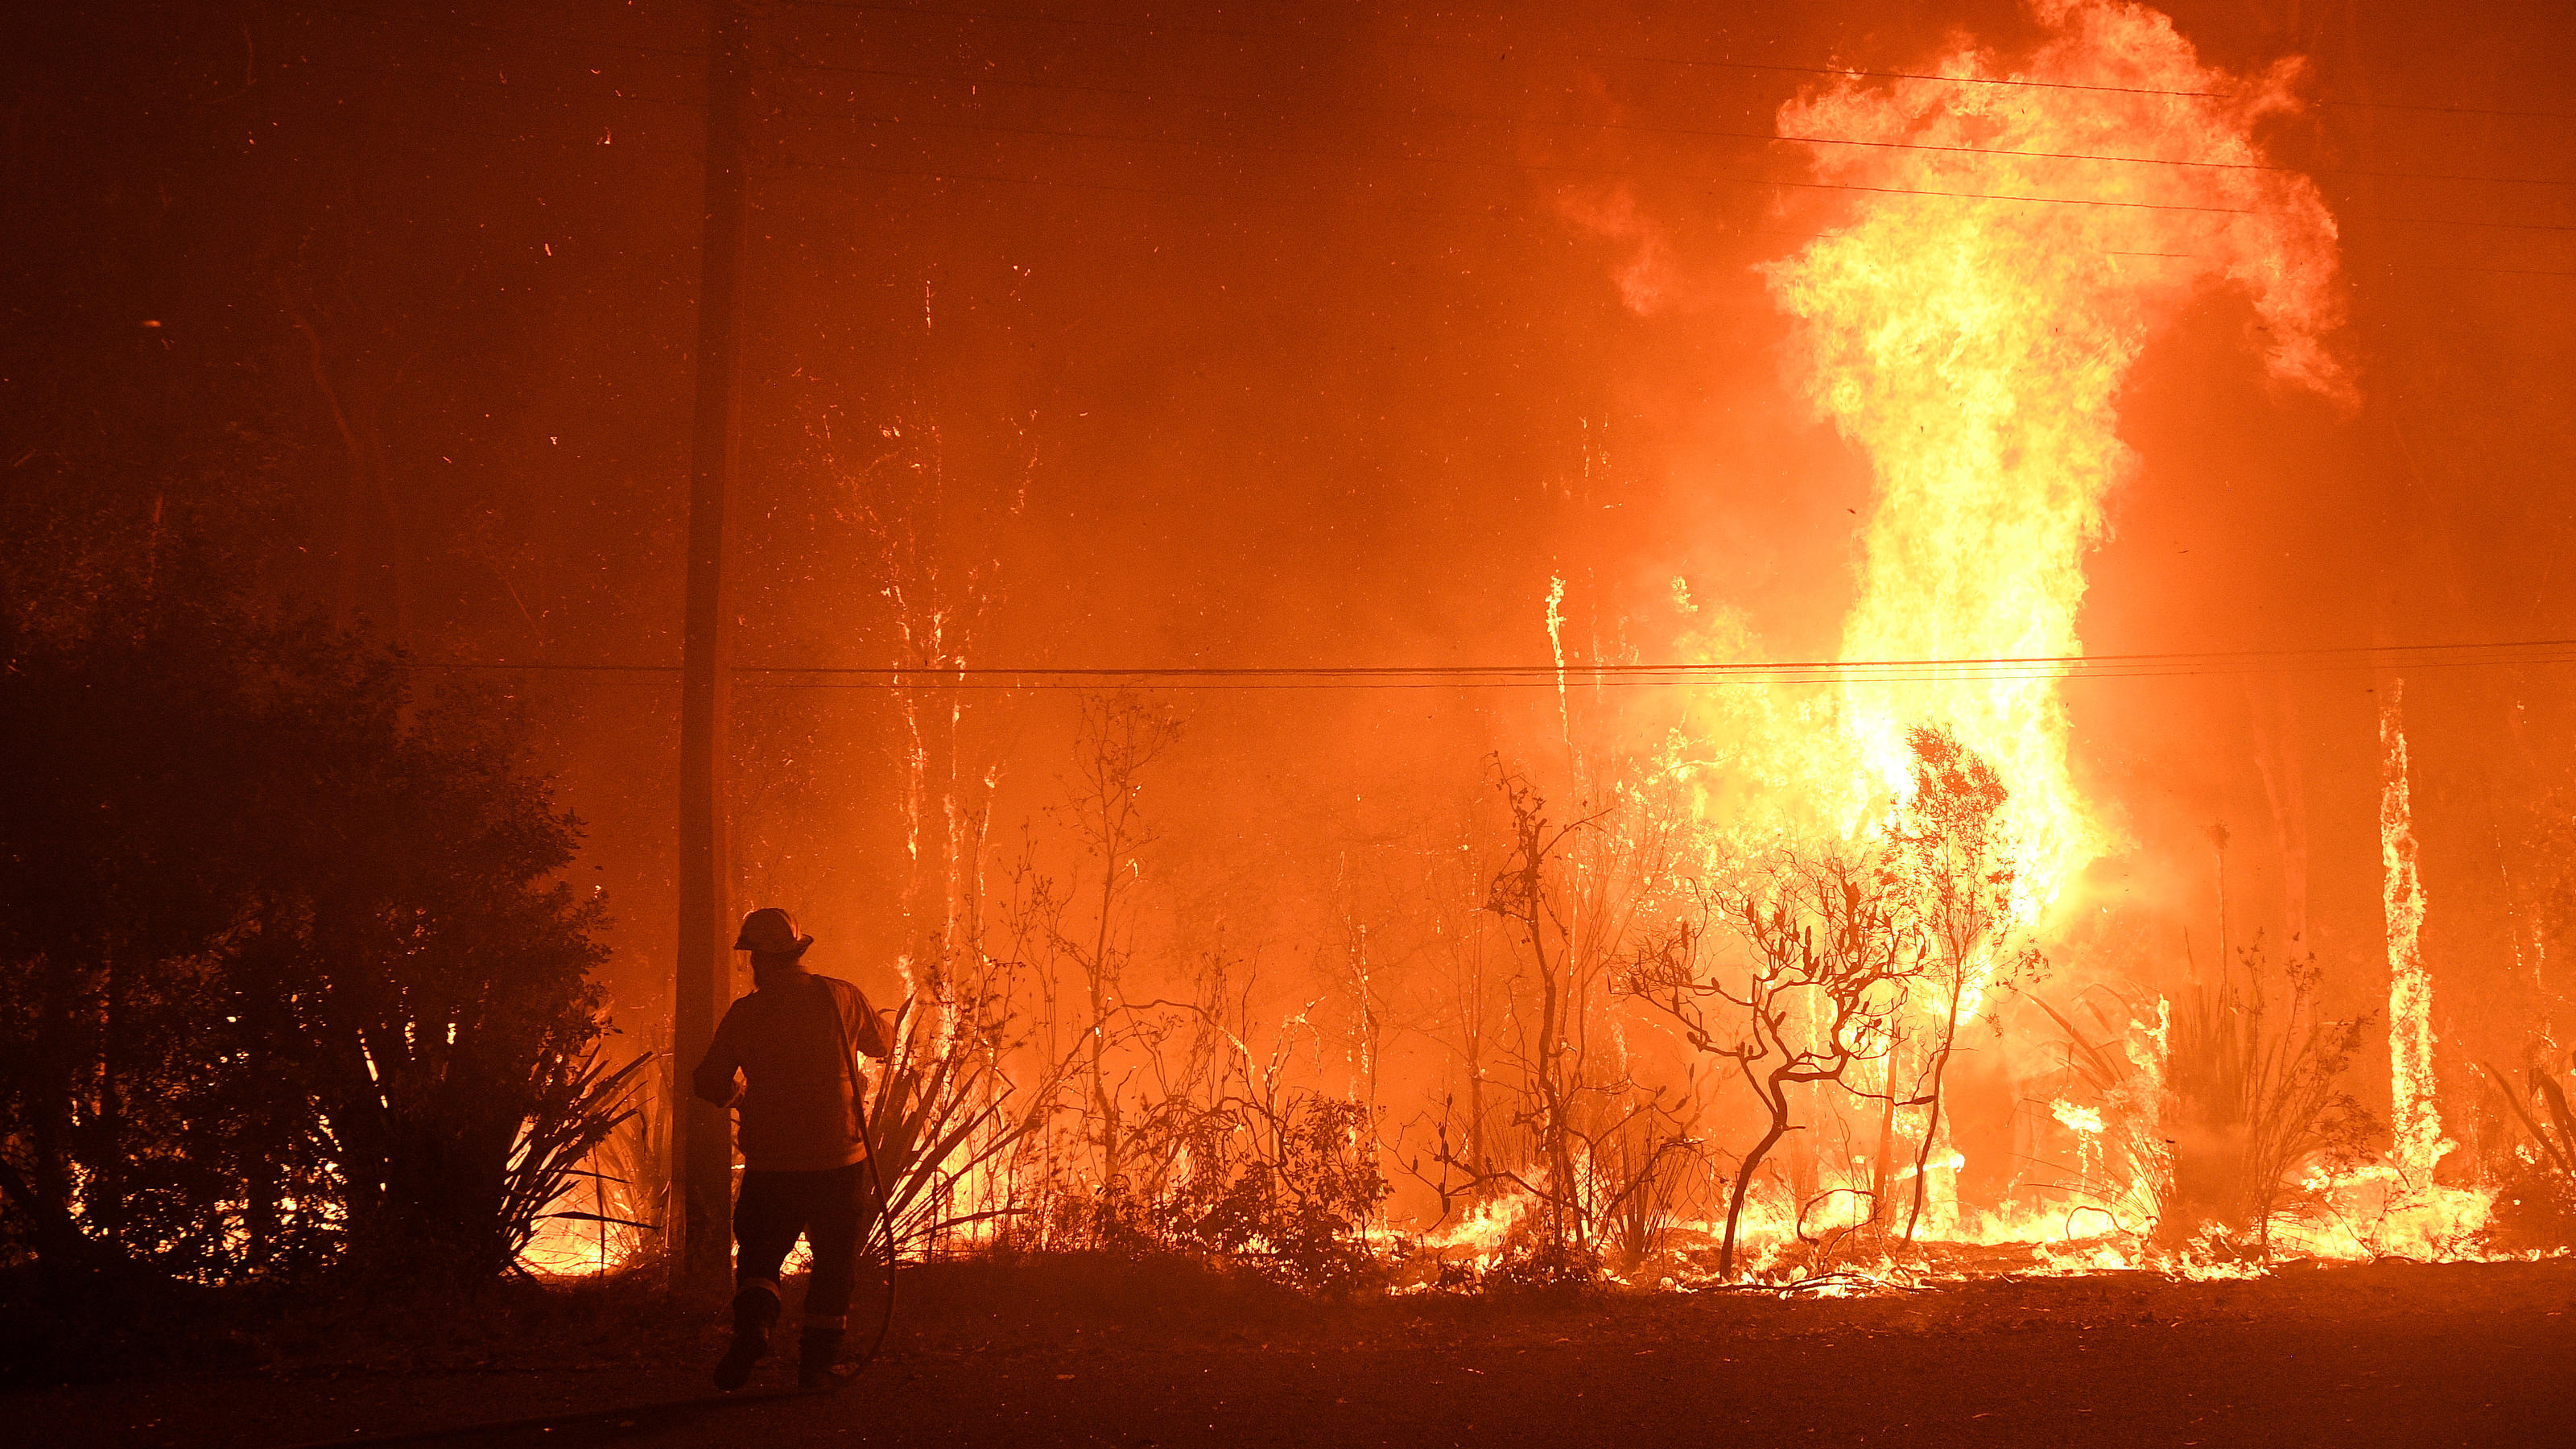  BUSHFIRES NSW, NSW Rural Fire Service crews protect properties on Waratah Road and Kelyknack Road as the Three Mile fire approaches Mangrove Mountain north of Sydney, Thursday, December 5, 2019.  ACHTUNG: NUR REDAKTIONELLE NUTZUNG, KEINE ARCHIVIERUN